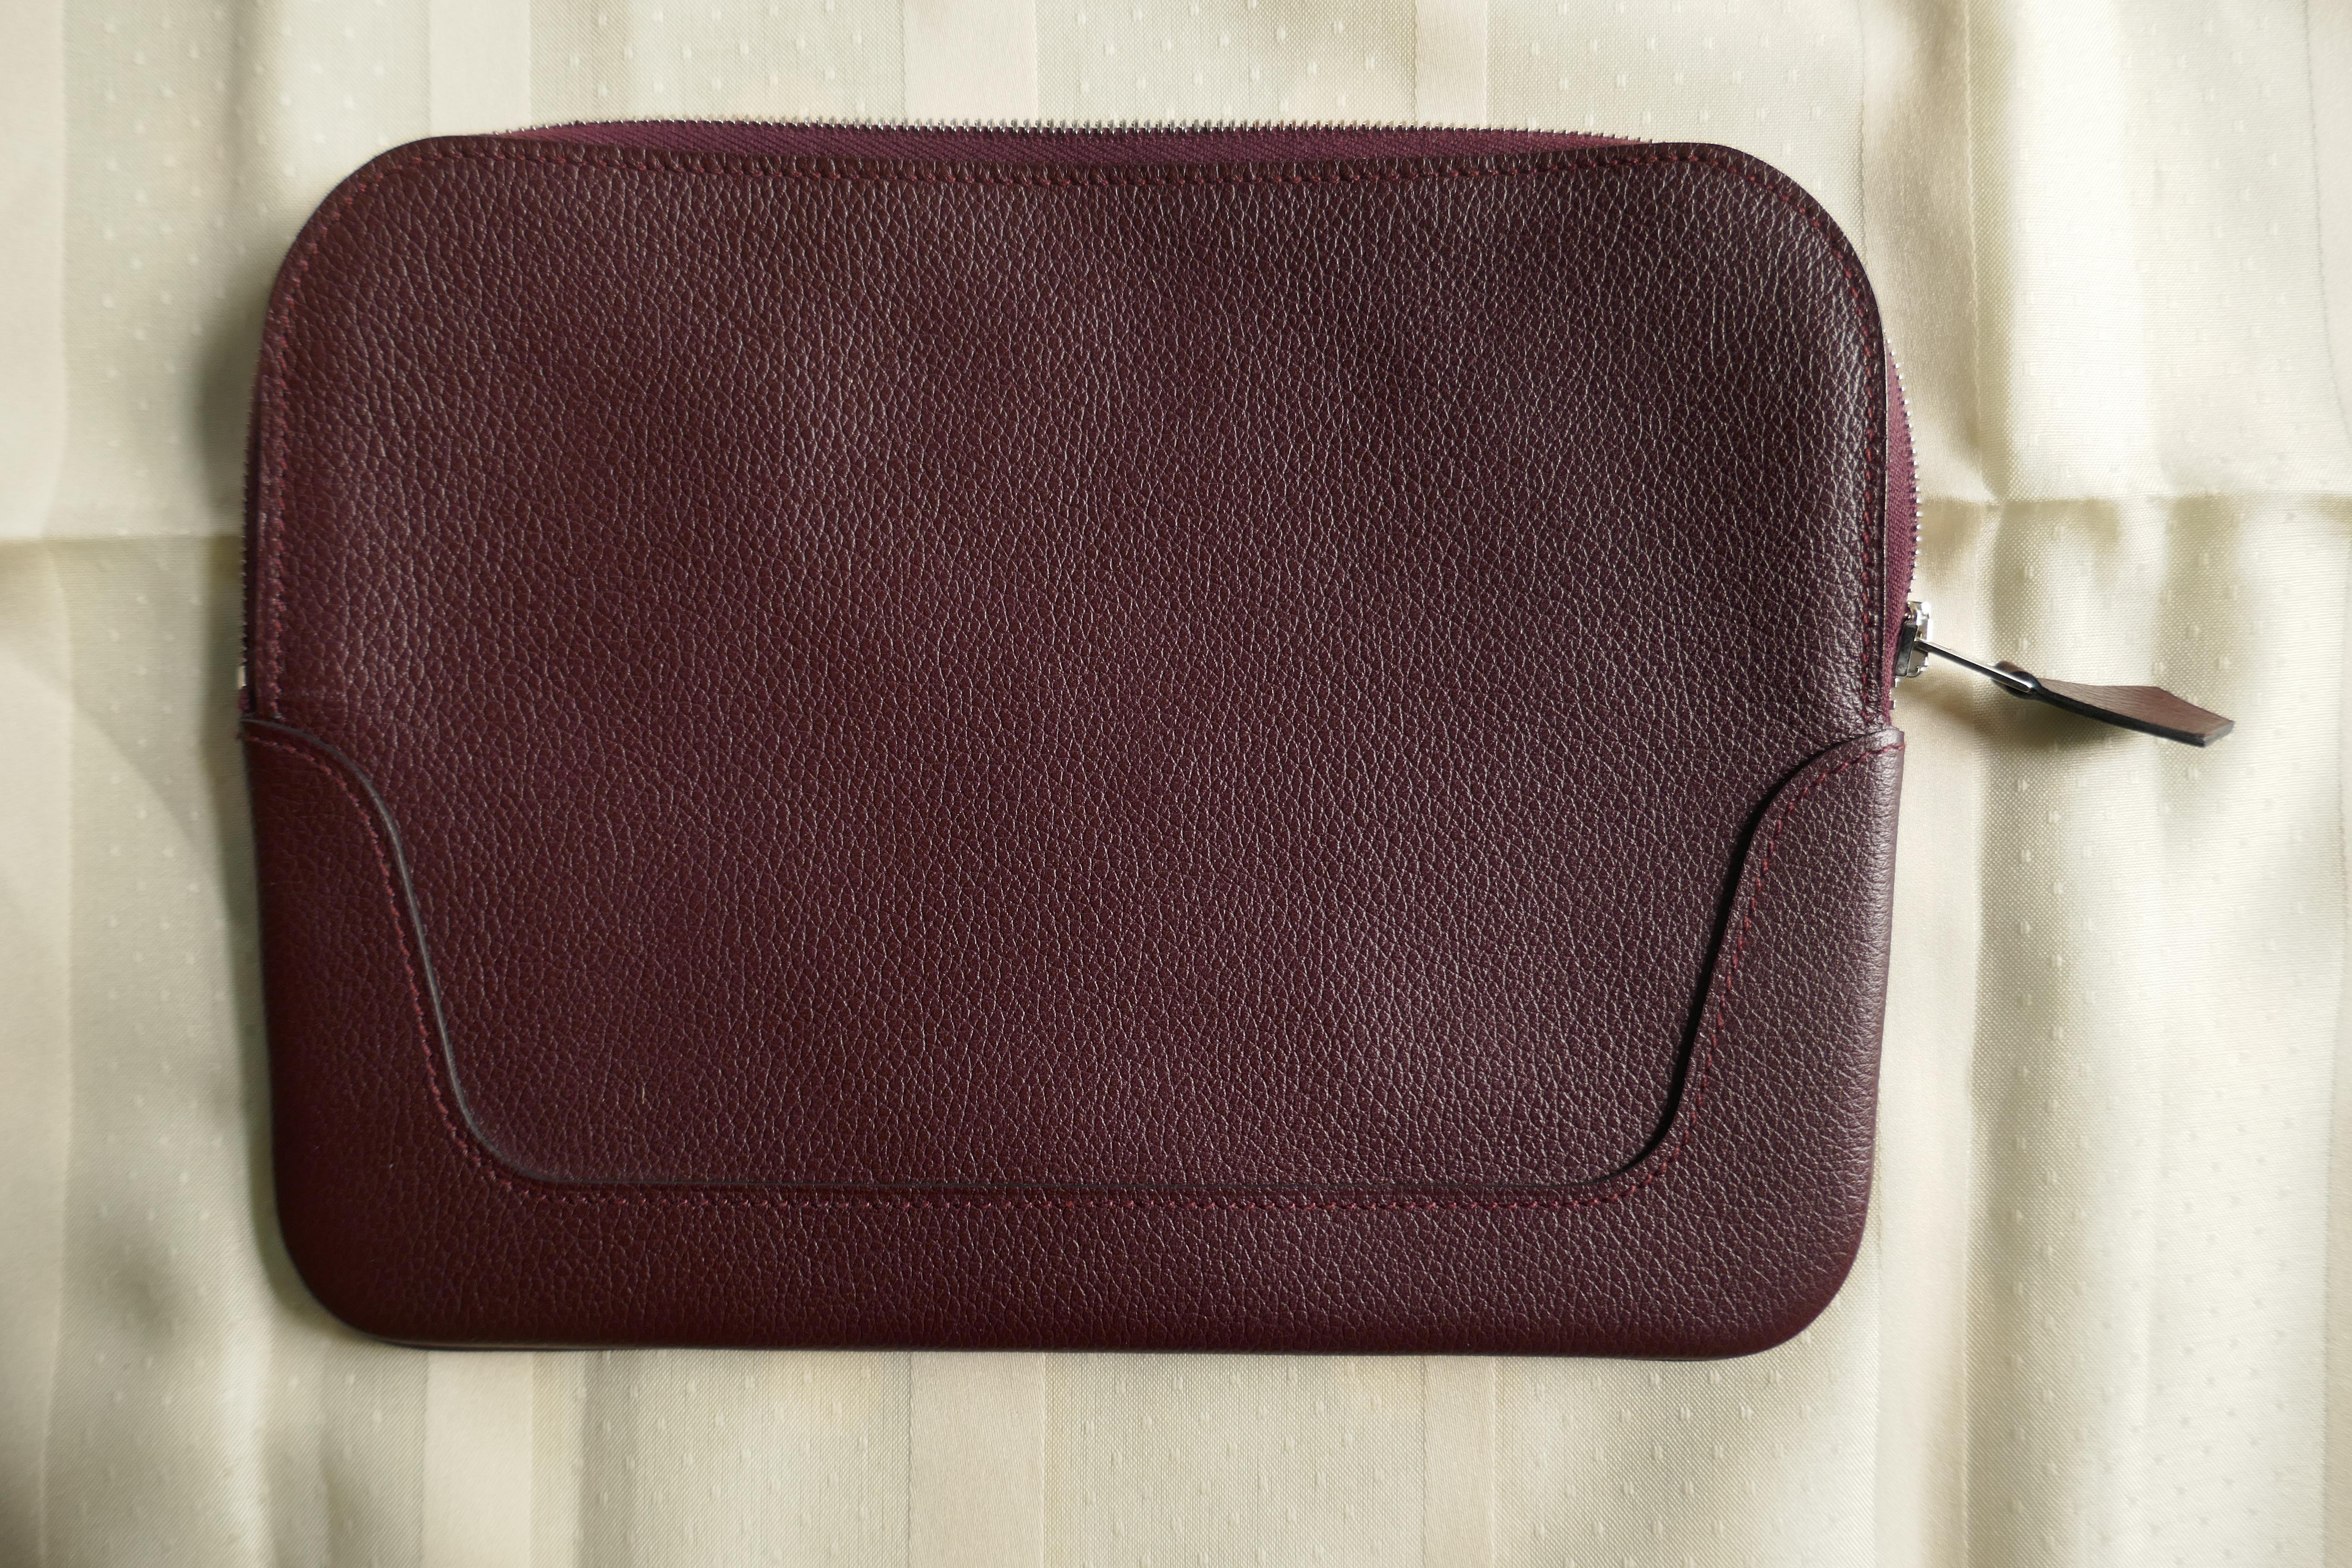 Hermes Burgundy Leather Plum Clutch Bag. Pochette

Totally Authentic, Wonderfully tactile in soft Leather 
Very Soft leather with silver metal zip closure
Fine quality with a roomy interior
The pochette has not been used, and it stored in its